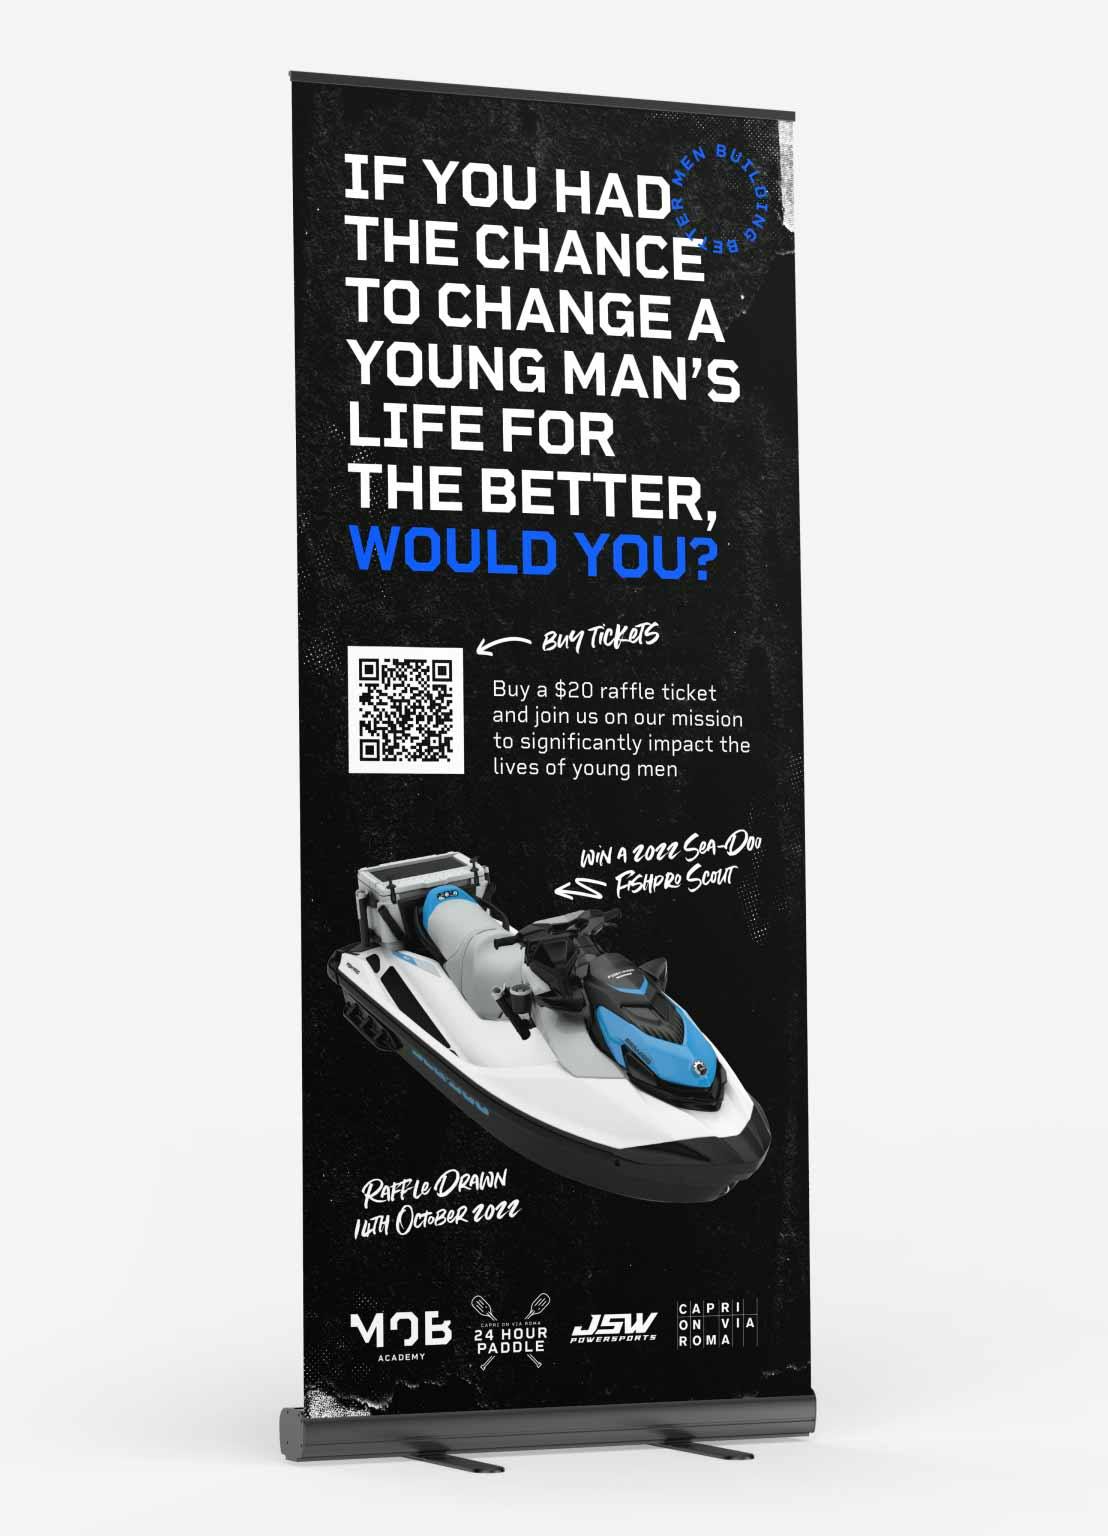 Men of Business Academy Capri Paddle pull up banner